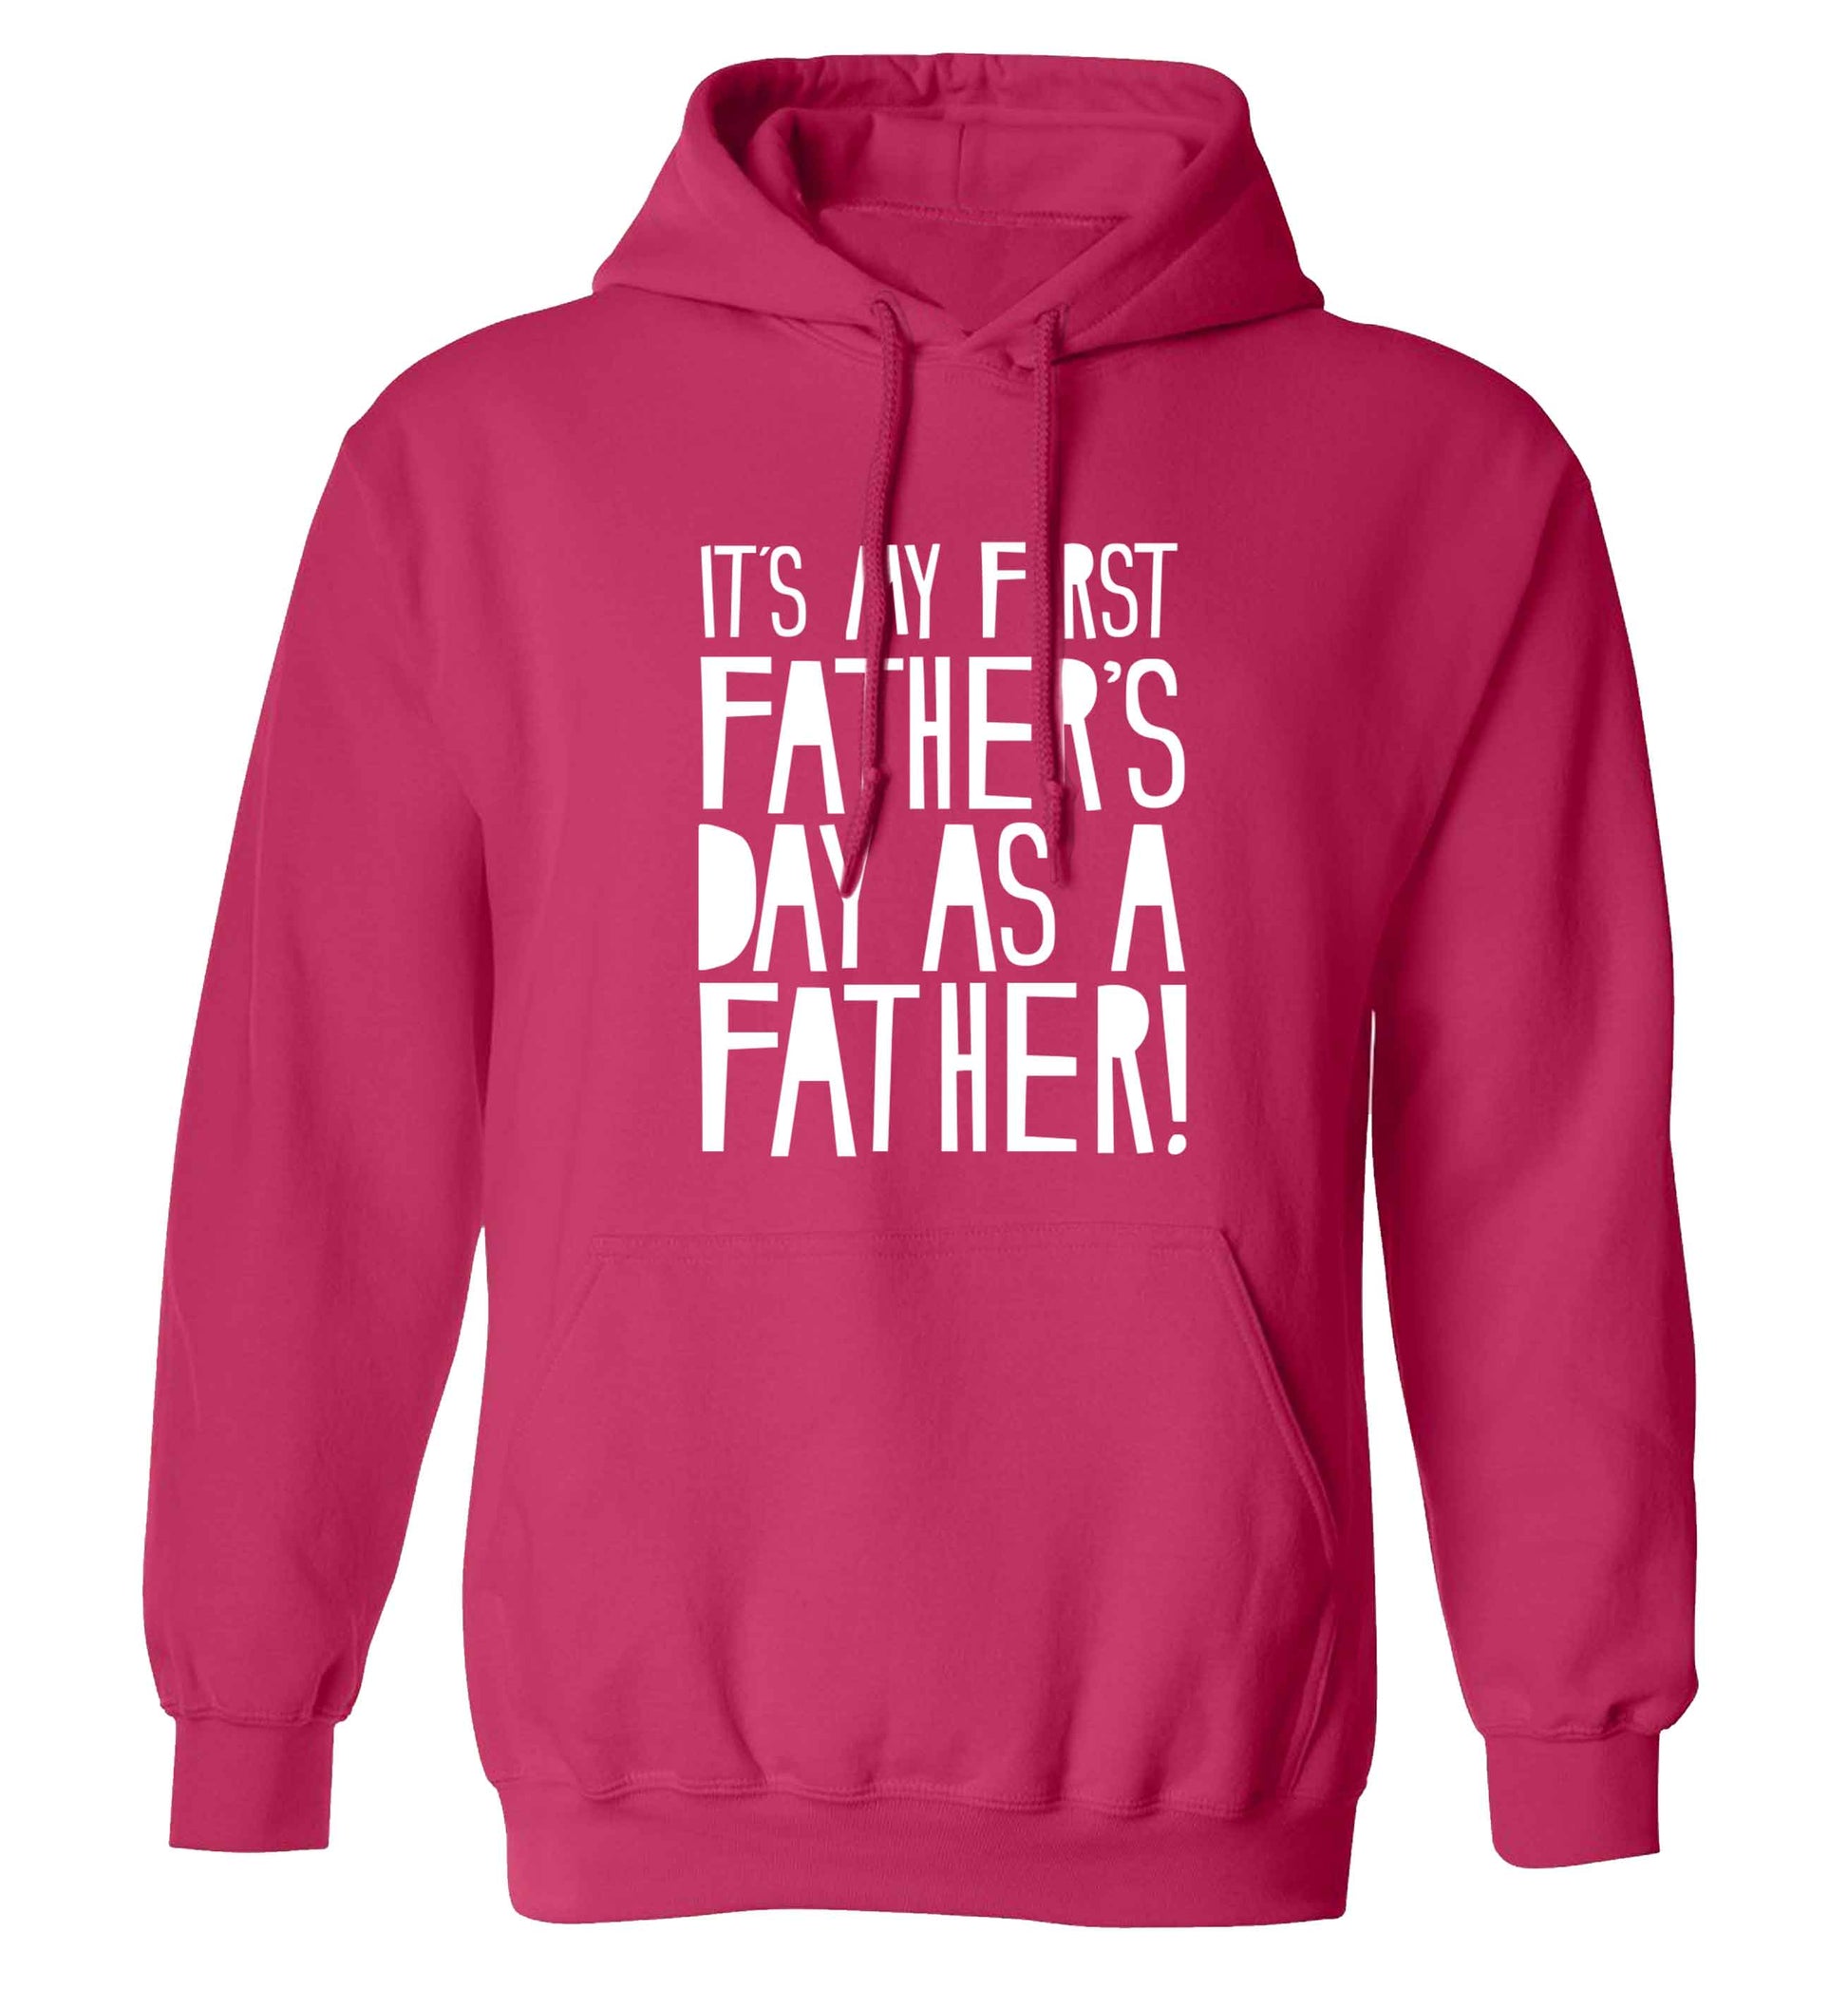 It's my first father's day as a father! adults unisex pink hoodie 2XL